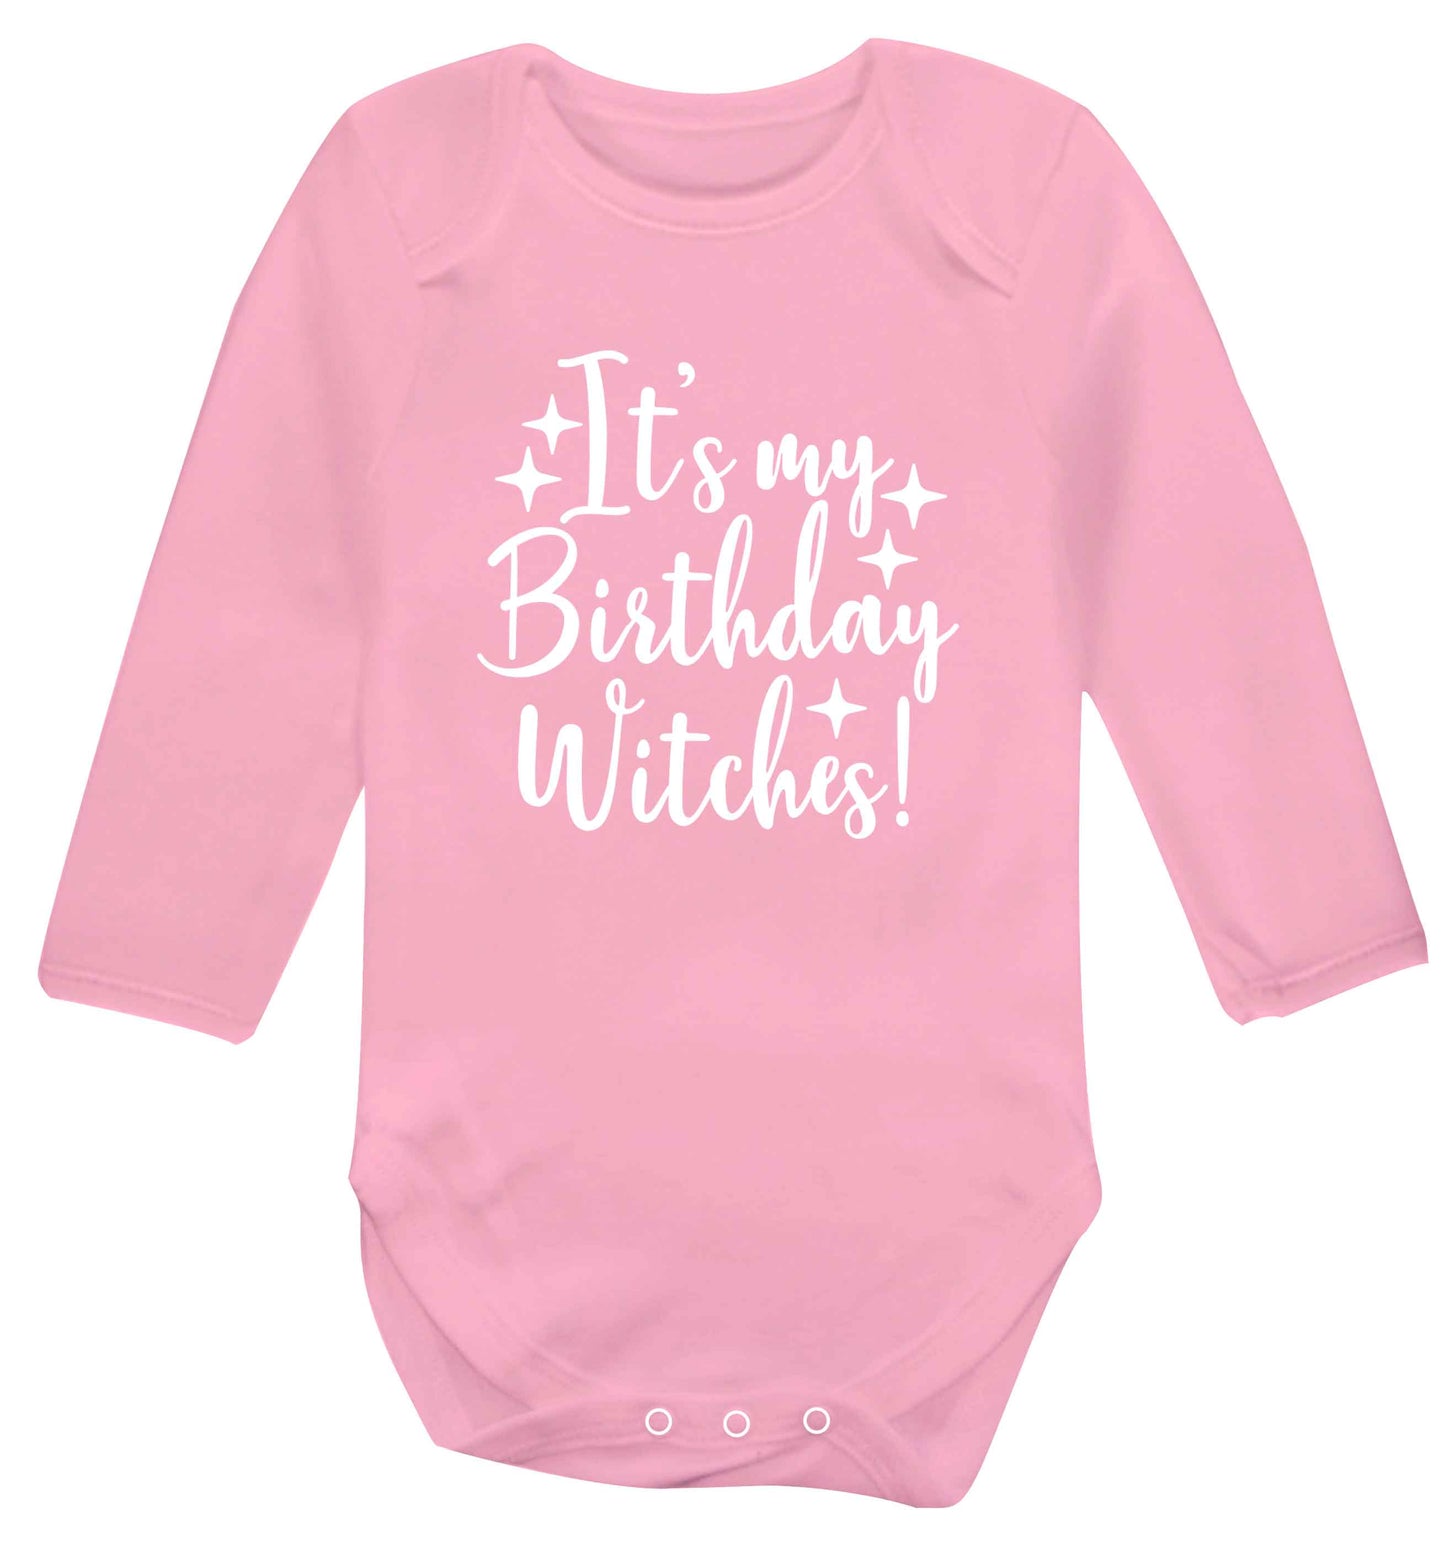 It's my birthday witches!baby vest long sleeved pale pink 6-12 months